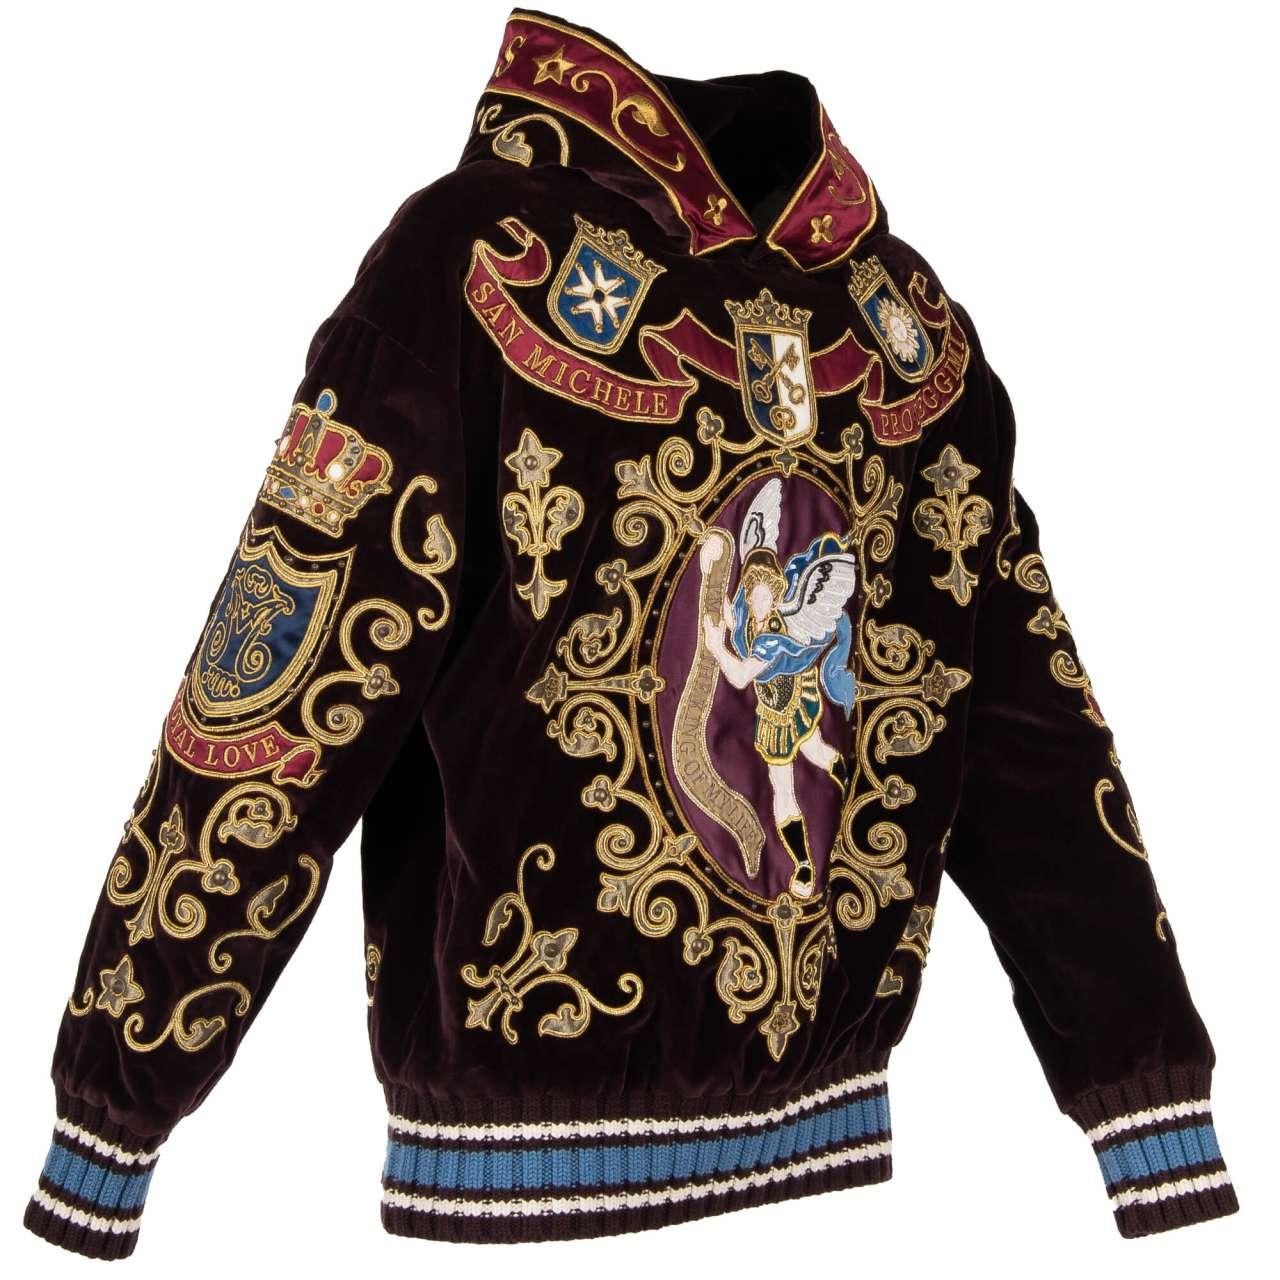 - Exceptional and rare pearls and studs embroidered oversize hooded sweater / sweatshirt with San Michele, Crown, King's Angels hand embroidery by DOLCE & GABBANA - RUNWAY - Dolce & Gabbana Fashion Show - New with Tags - Former RRP: EUR 4.450 - MADE